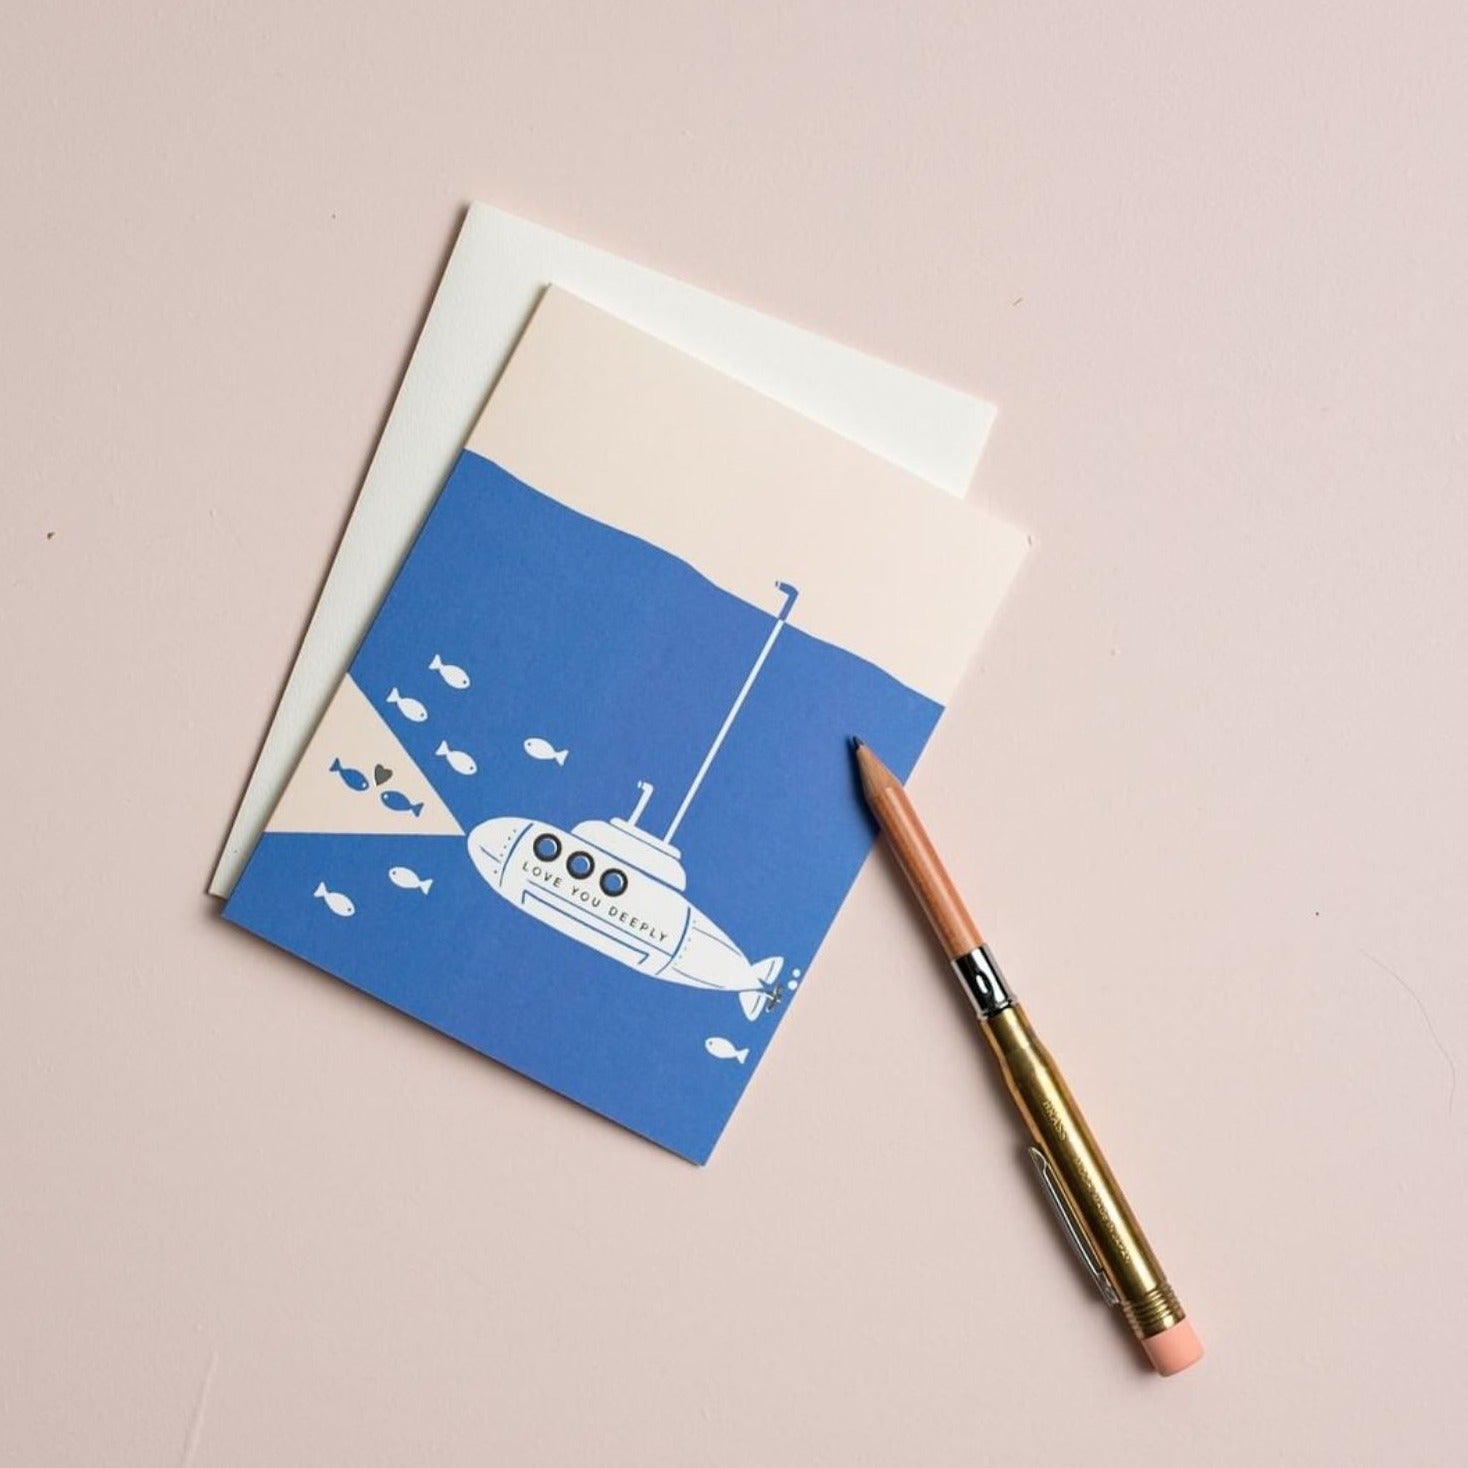 Illustrated love card sitting on a beige background next to a gold pen, with the card printed on warm white premium cardstock, featuring a submarine underwater with fish, and two fish in the submarine's headlight beams sharing a heart, with the text 'Love You Deeply.